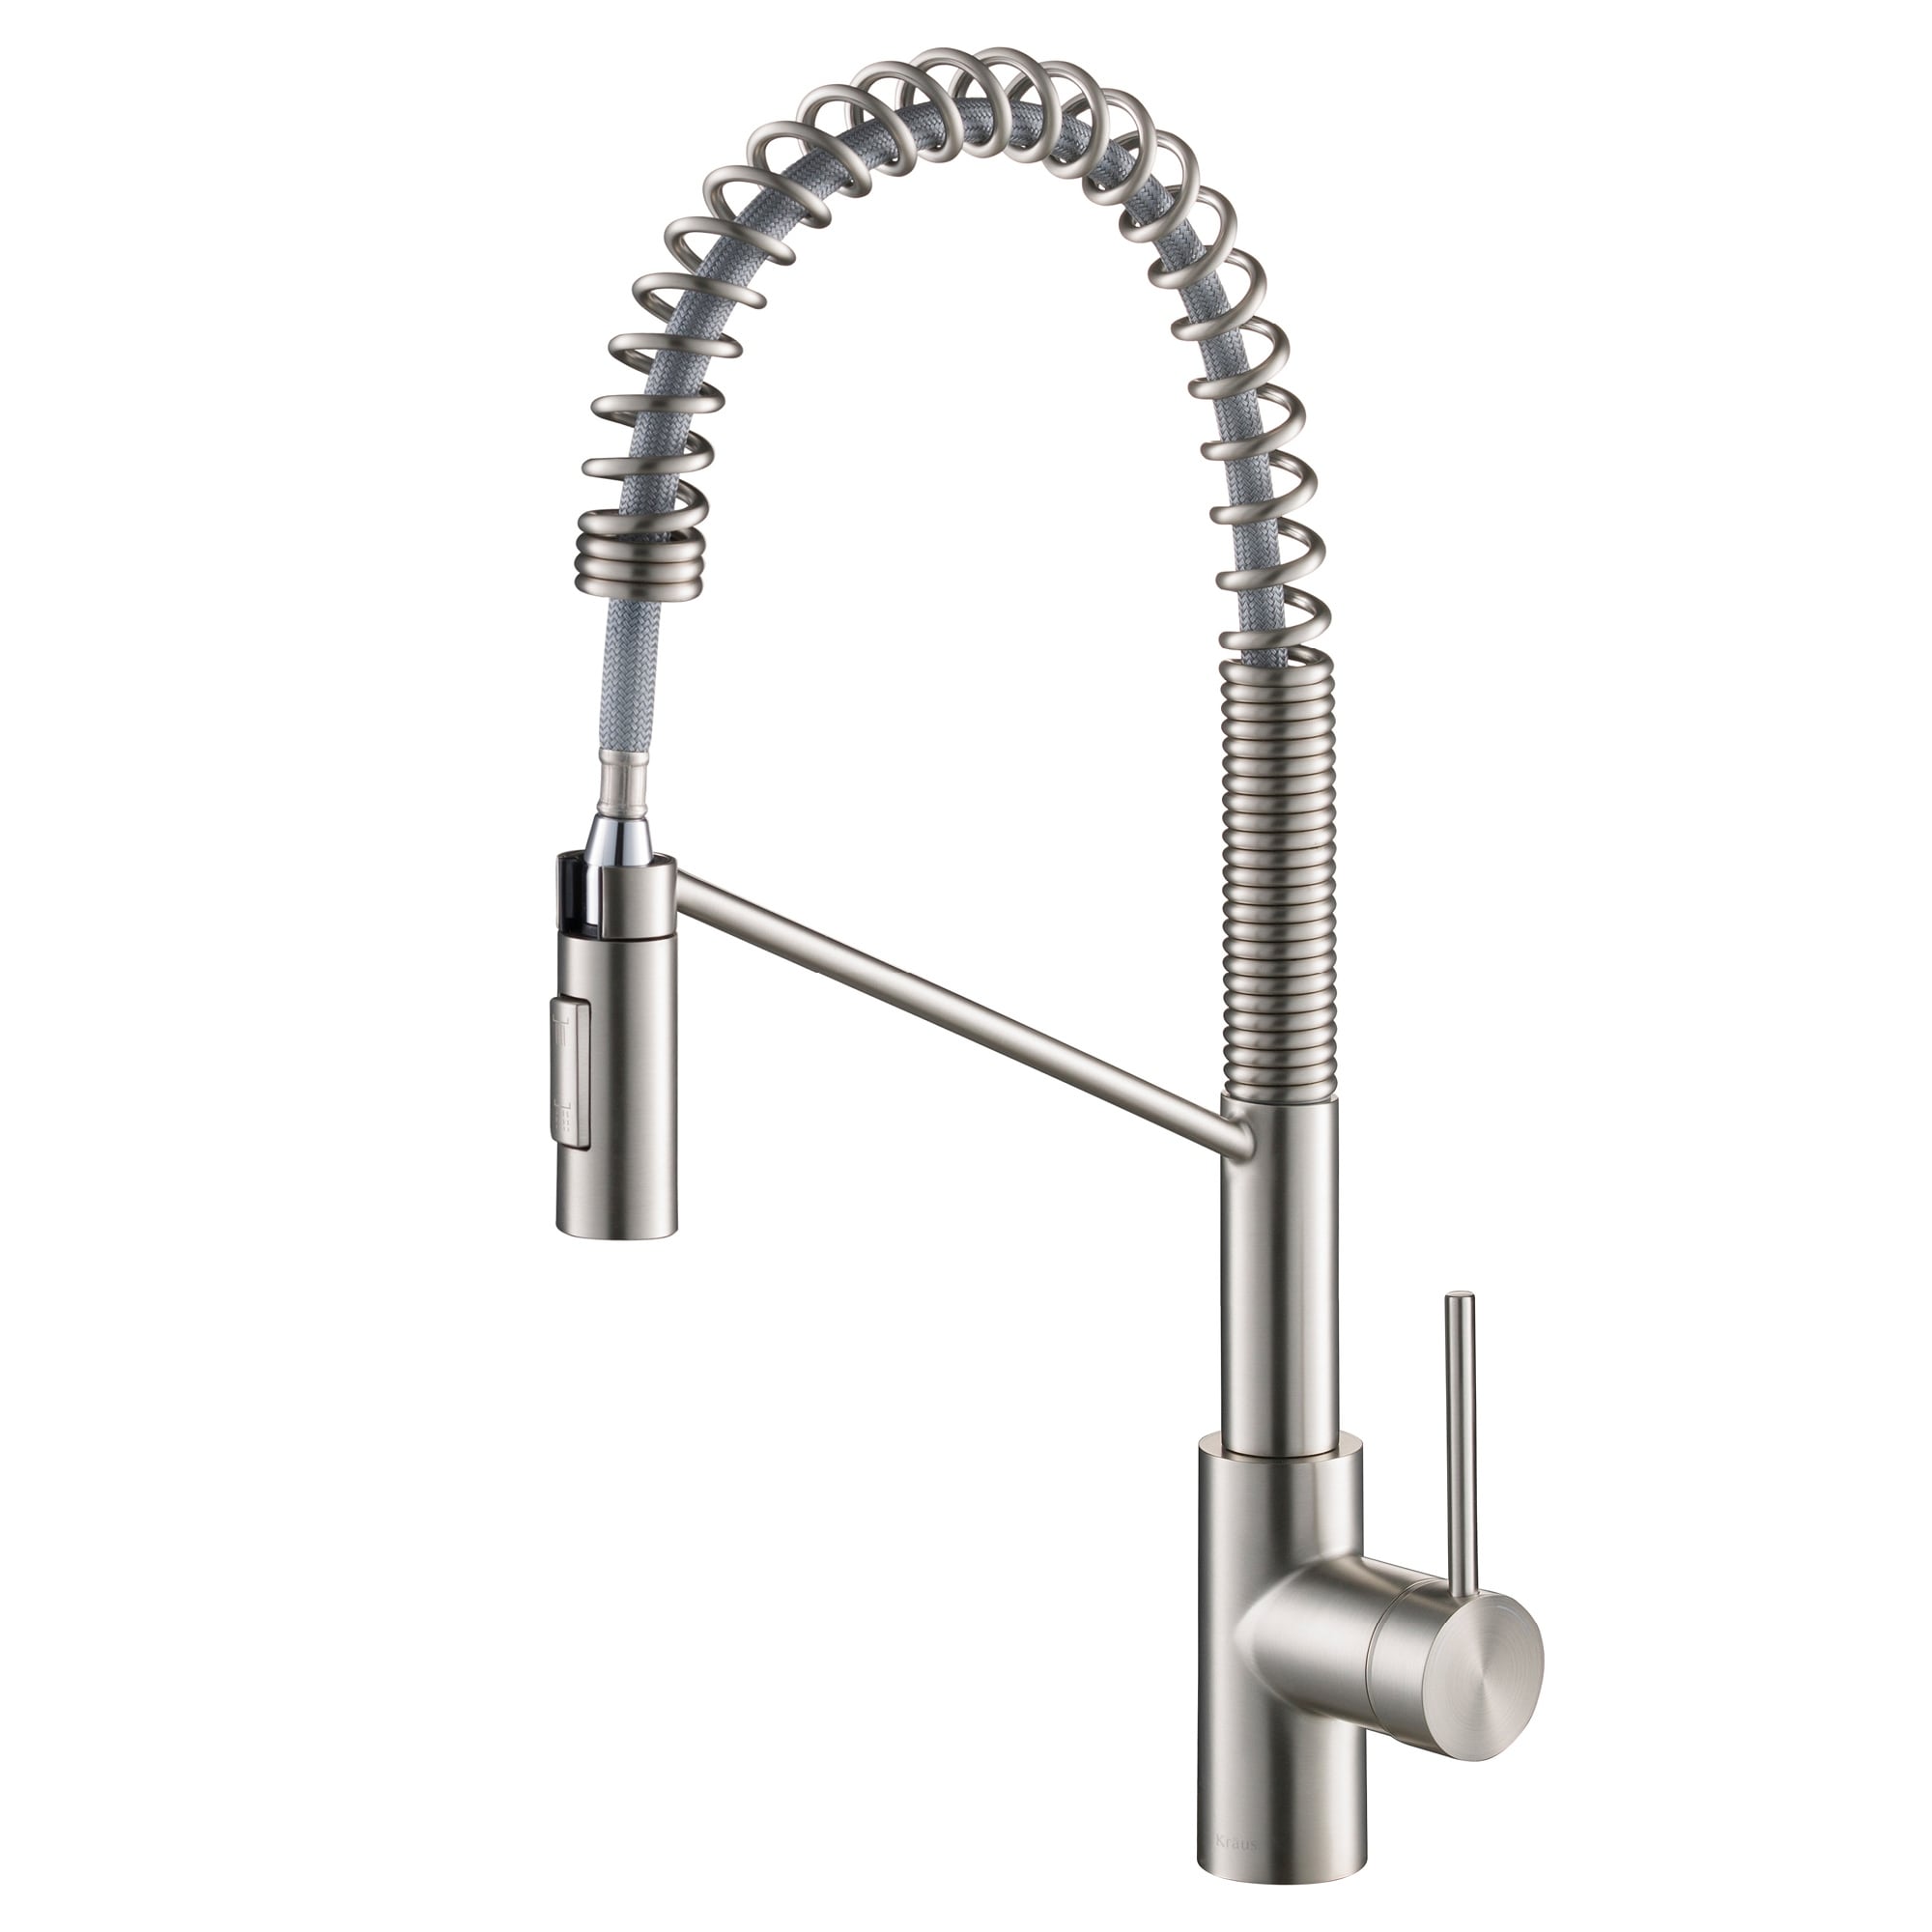 Kraus Kpf 2631 Oletto Commercial 2 Function Pulldown Kitchen Faucet Overstock 20359695 Spot Free Stainless Steel